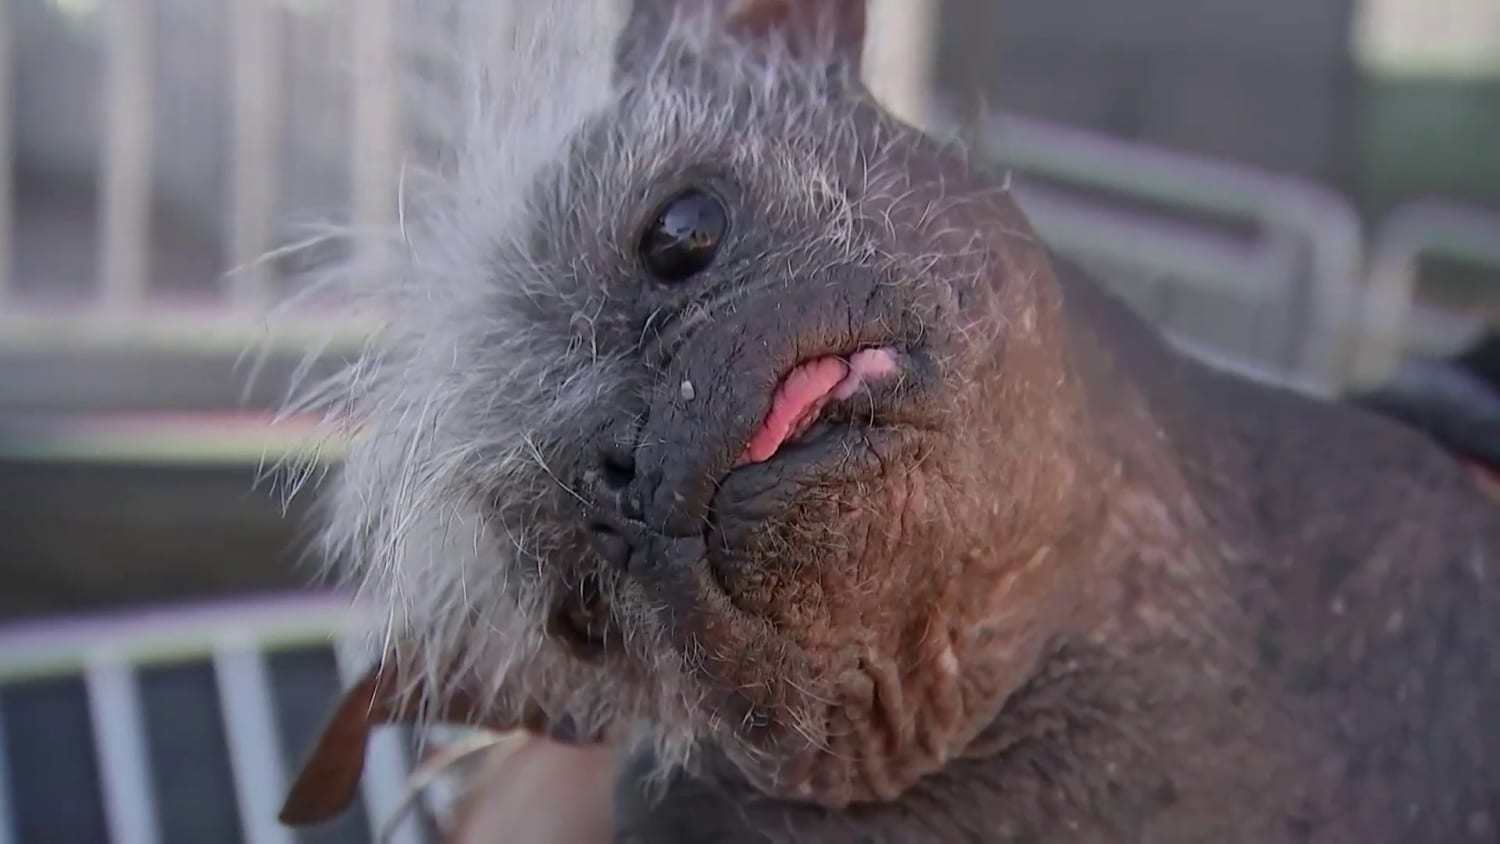 Meet the winner of the 'World's Ugliest Dog' competition